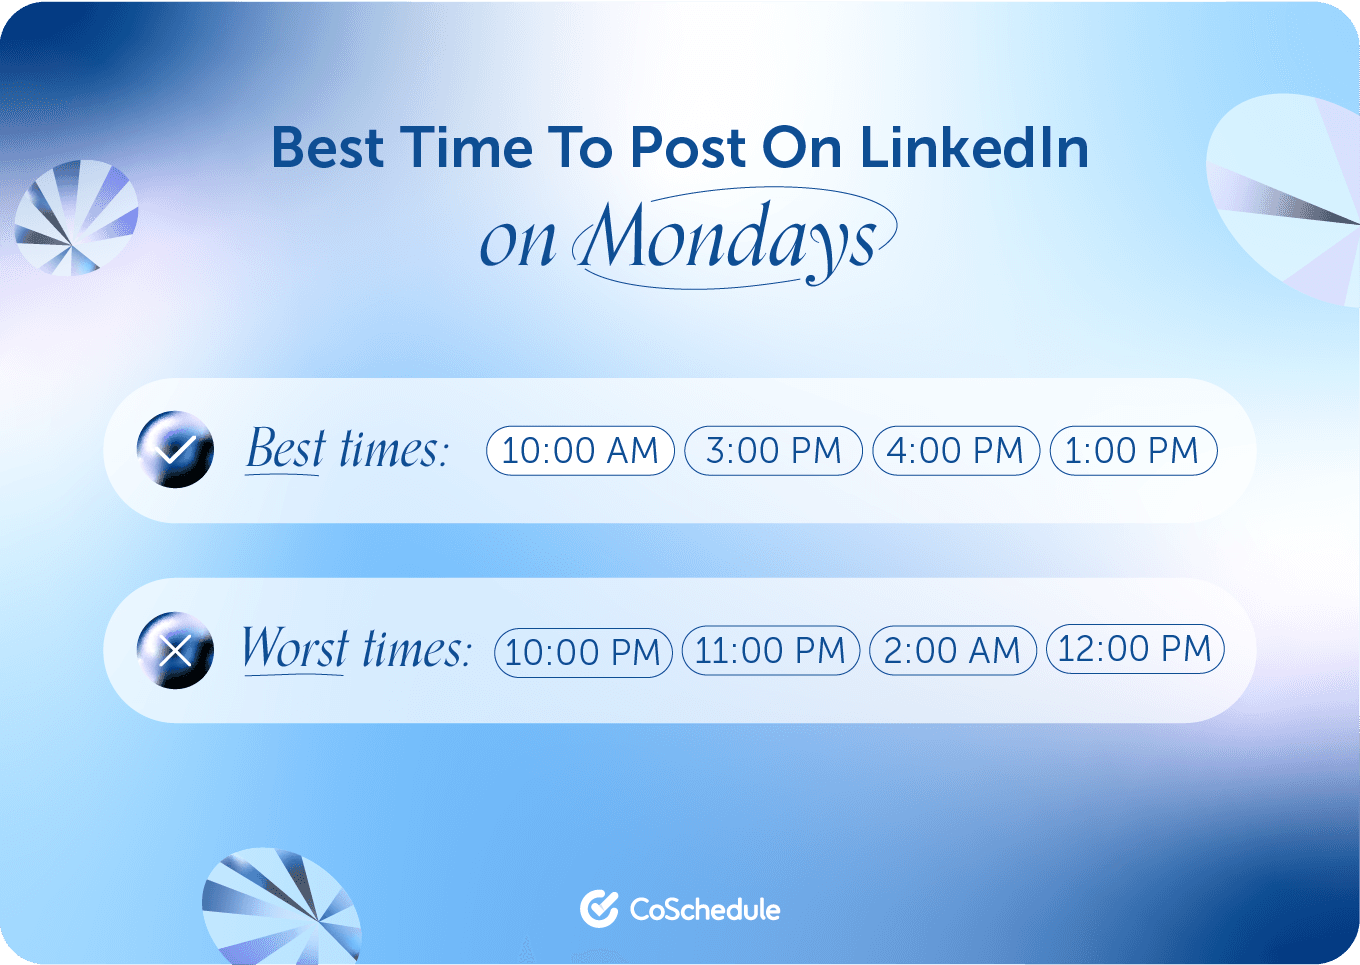 CoSchedule graphic on the best times to post on LinkedIn Mondays